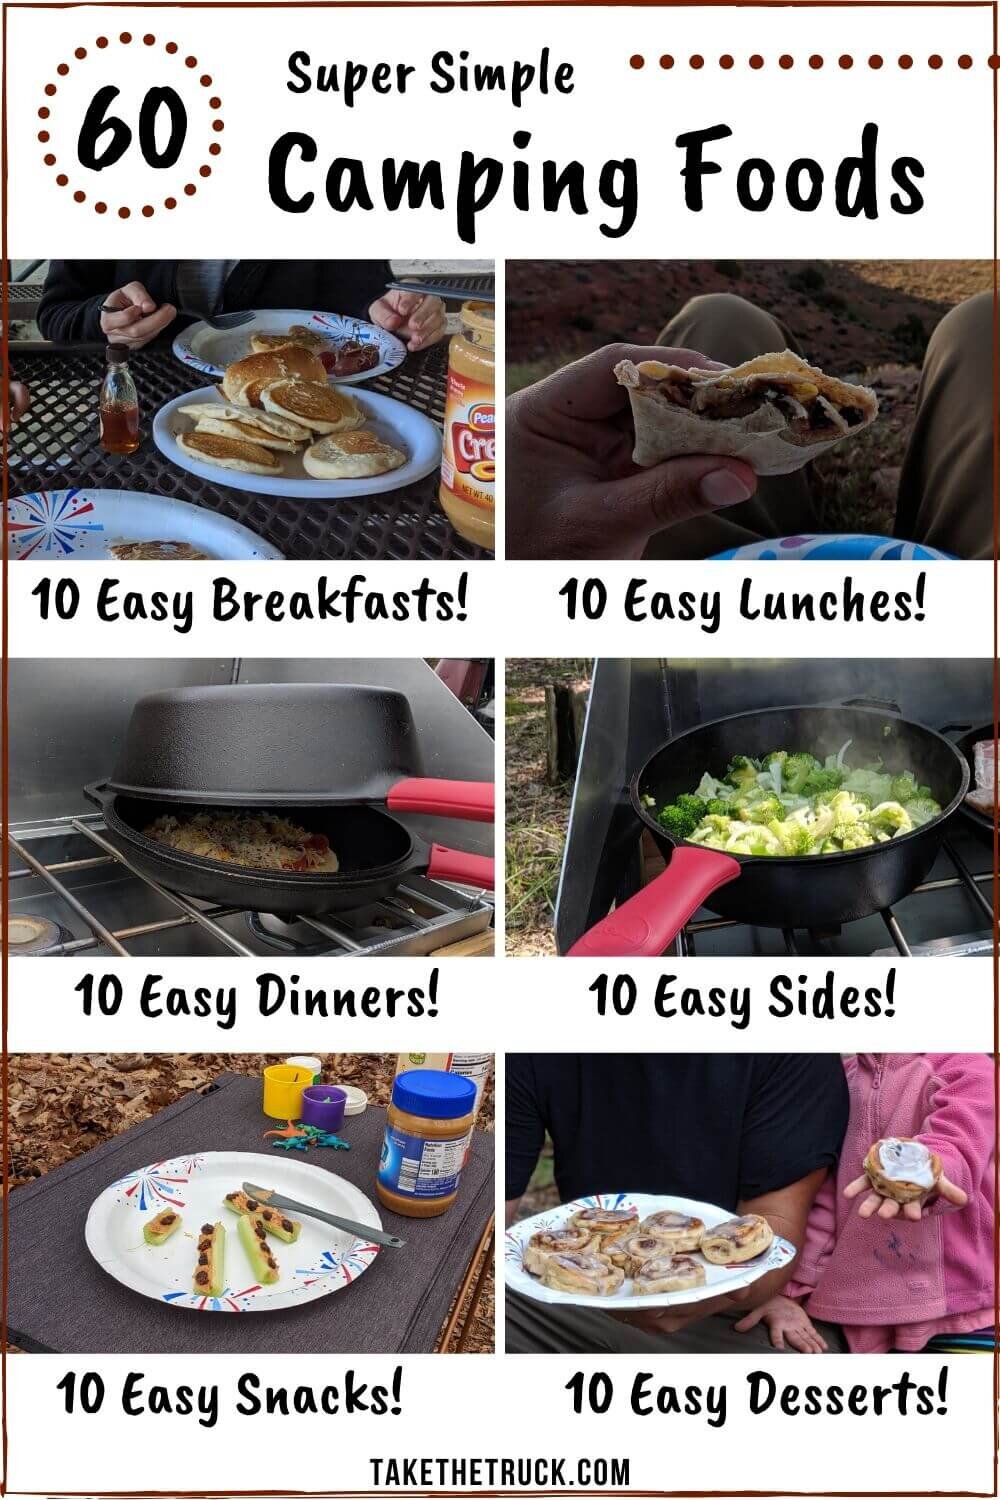 60 different easy camping food and meal ideas! Simple camping breakfasts, lunches, easy camping dinners, plus sides, camping snacks, and desserts - all either make ahead or no cook.